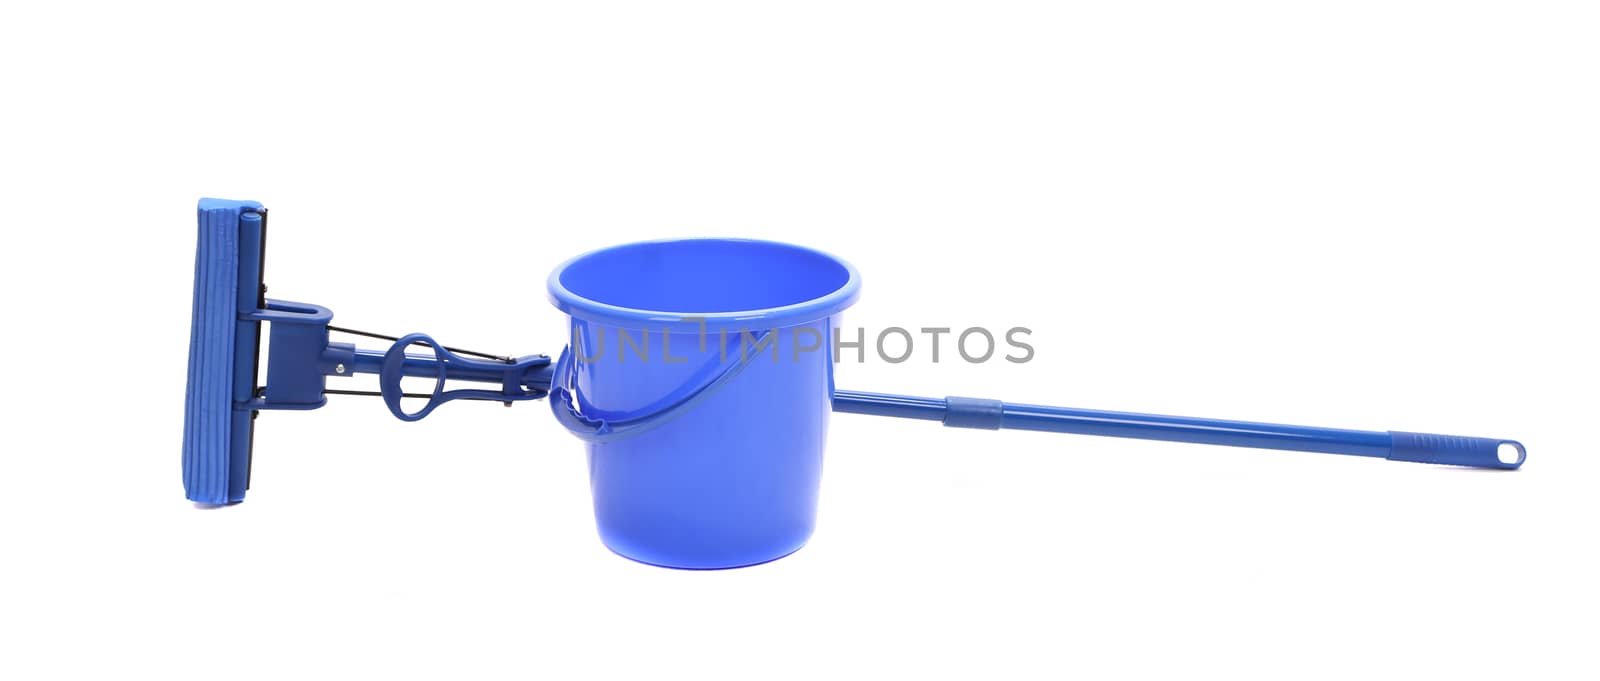 Blue bucket with sponge mop. by indigolotos